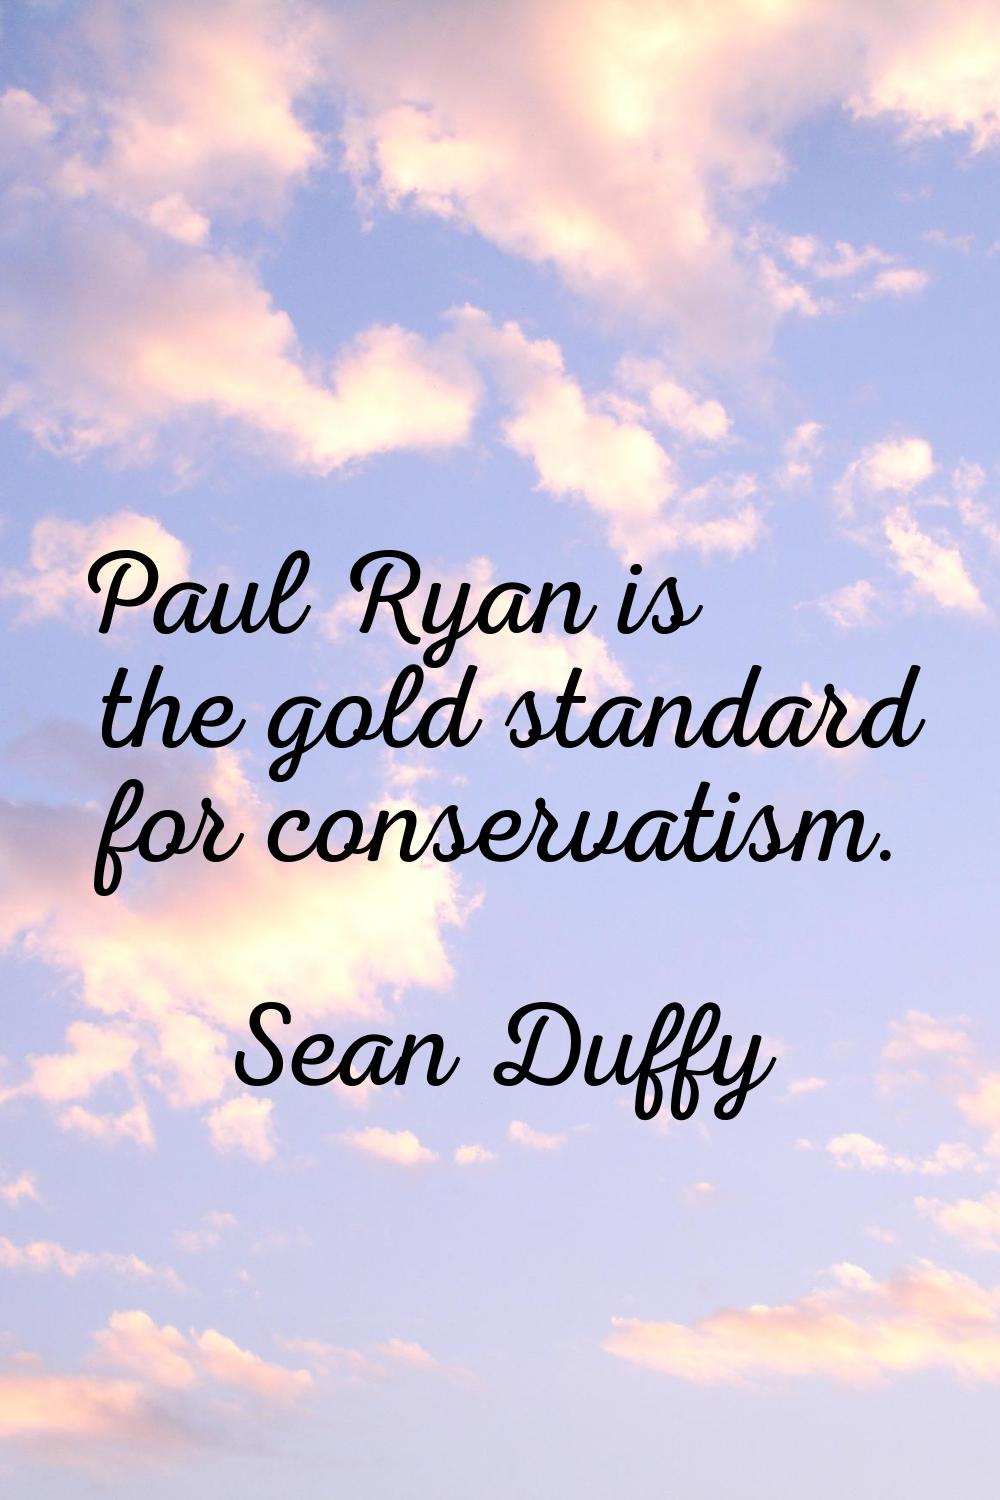 Paul Ryan is the gold standard for conservatism.